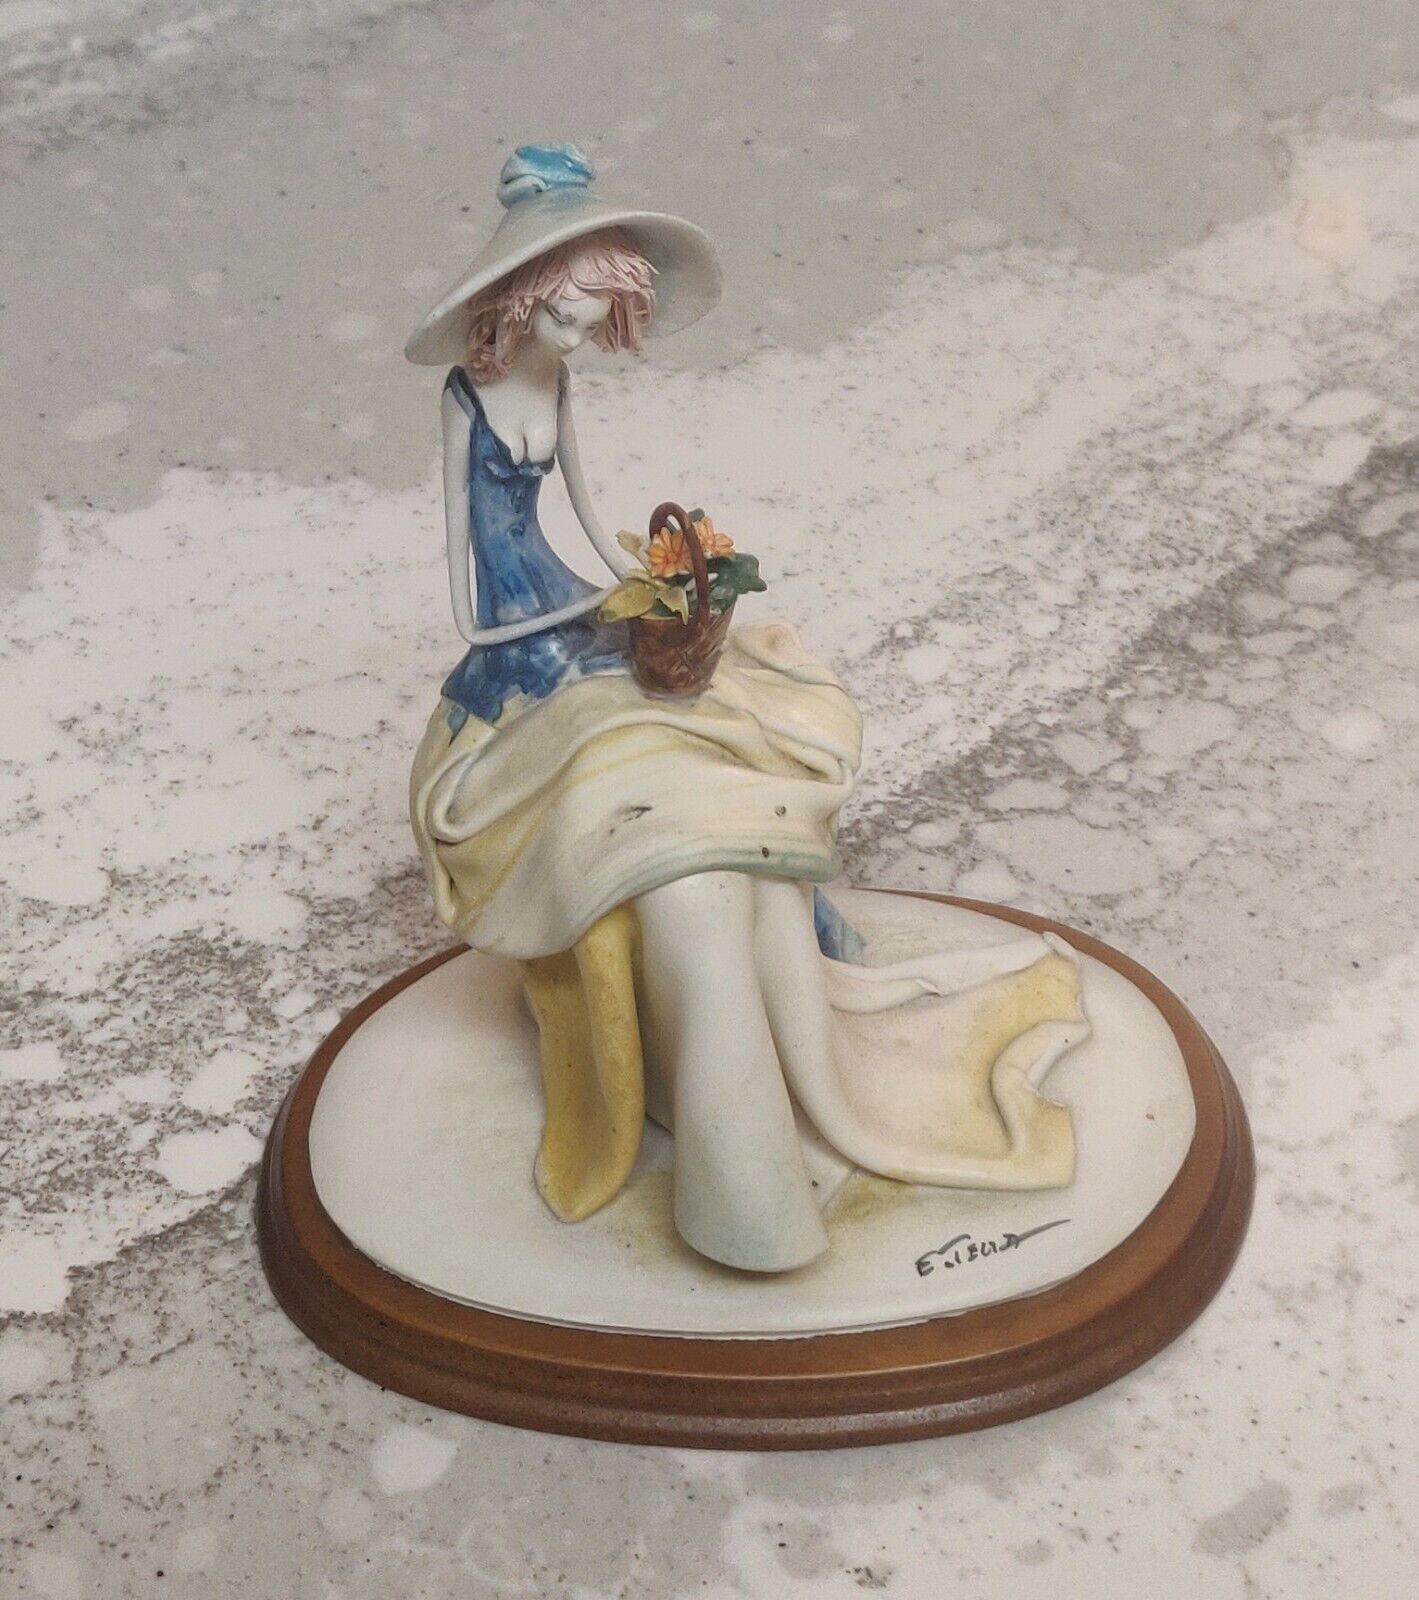 E. Tezza Porcelain Figurine Woman in Hat Sitting w/ Basket of Flowers #139 Italy